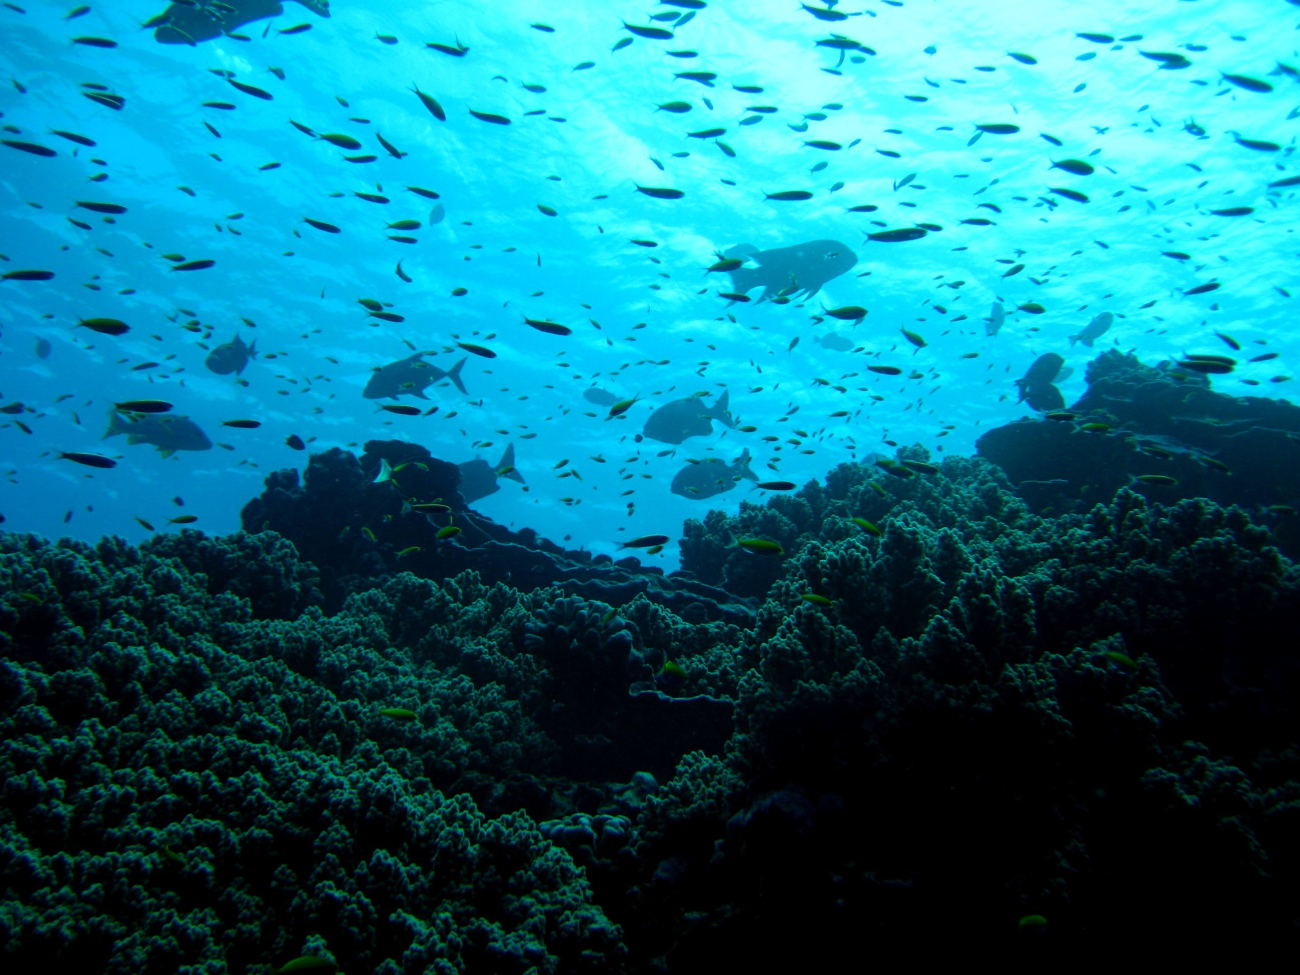 Reef scene with hundreds of fish